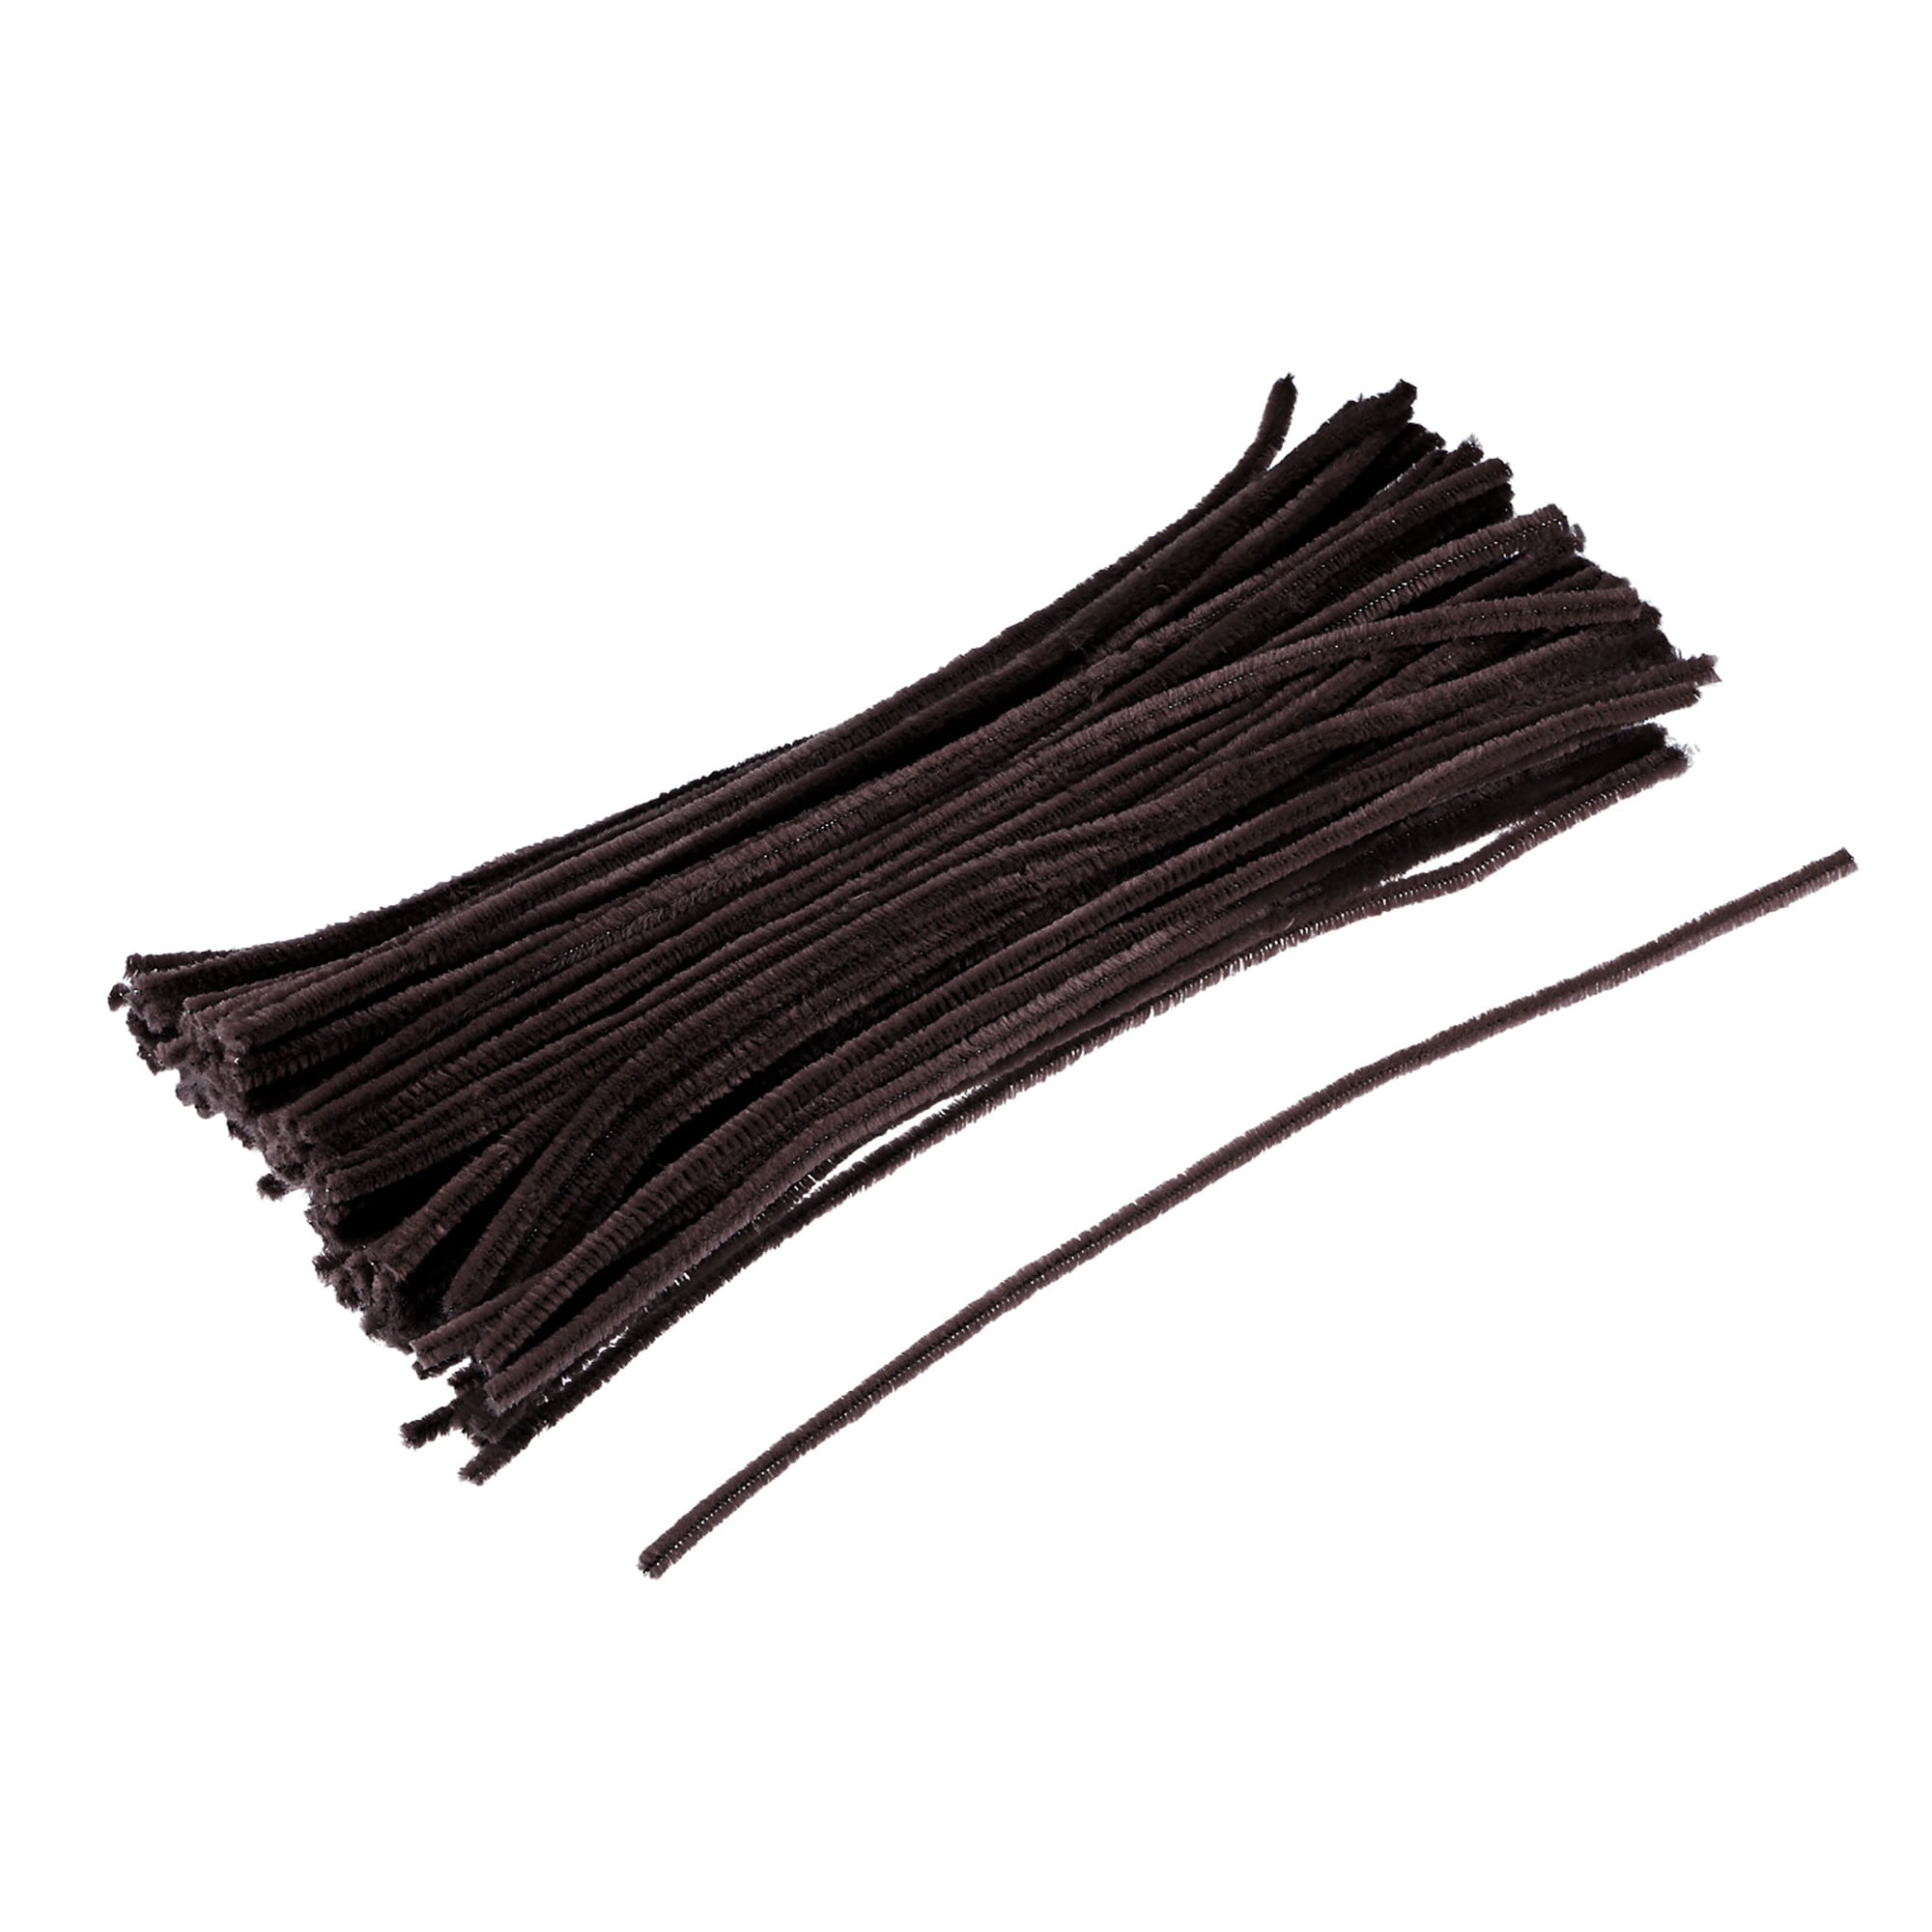 GOTOONE Black Pipe Cleaners Chenille Stems (300 Pack) for DIY Art Craft Decorations Creative (0.24 x 12 inch)